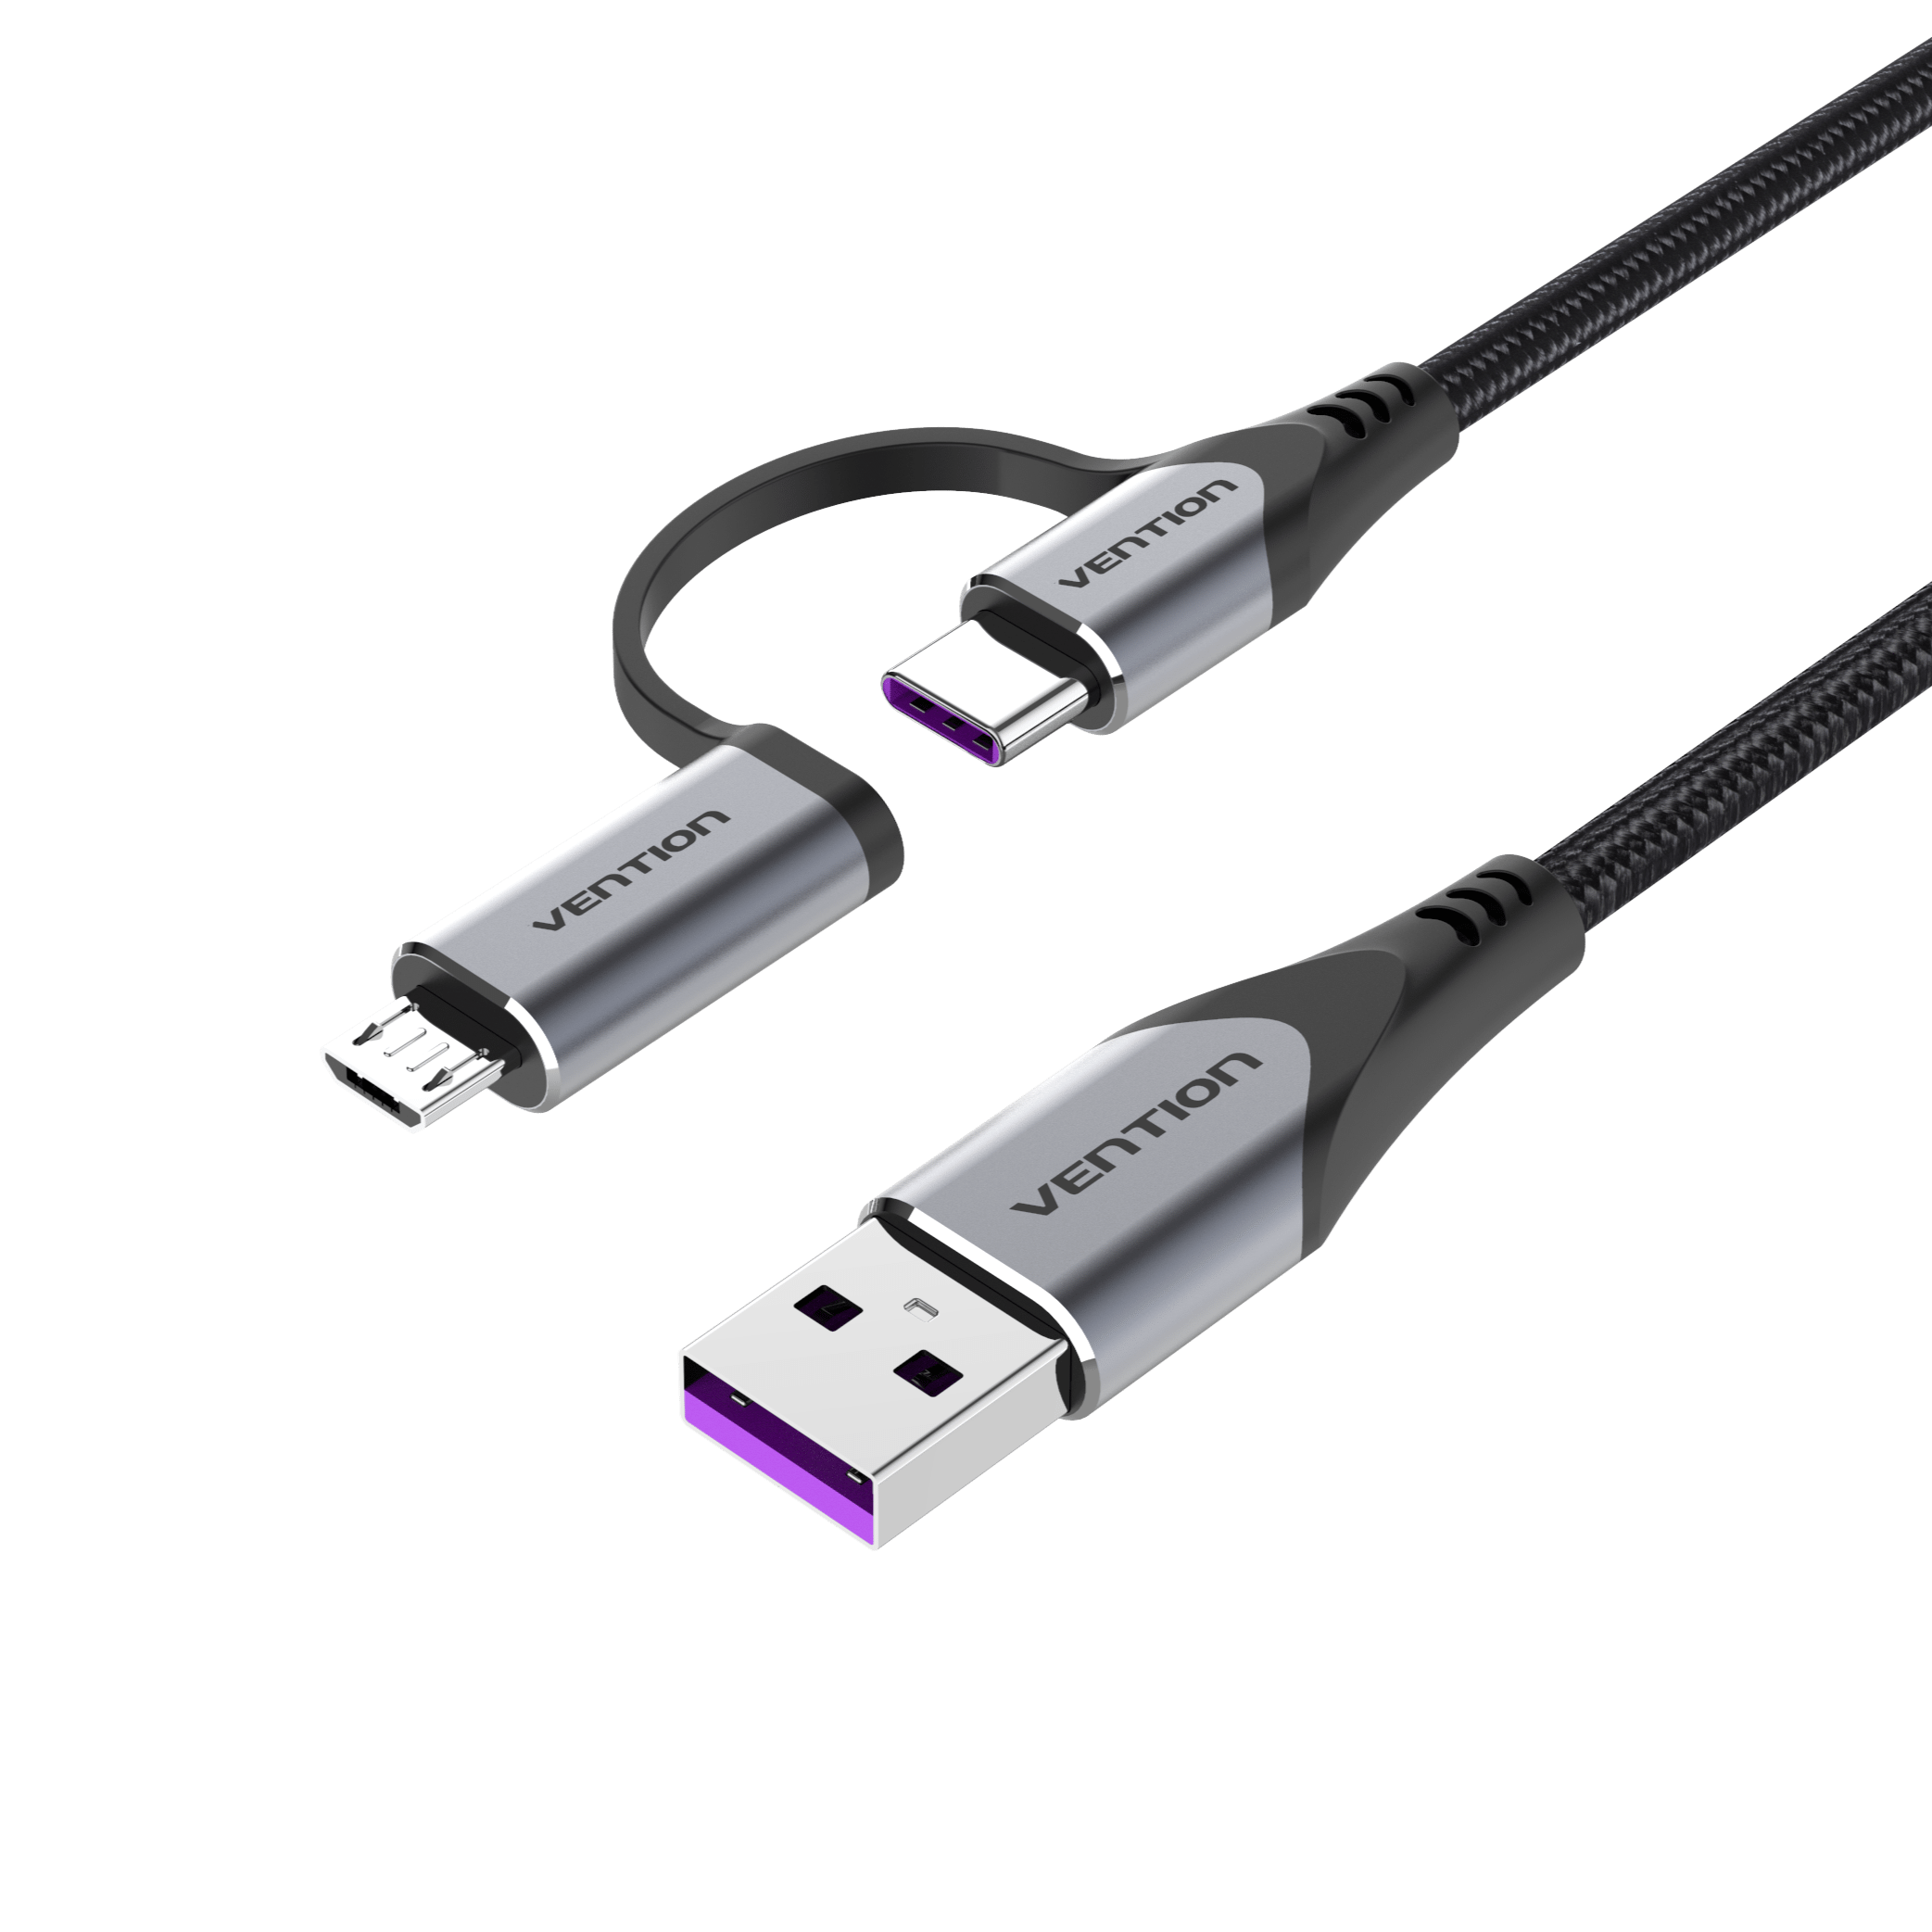 VENTION 速卖通 5A USB Type C Cable for Huawei P40 Pro Mate 30 P30 Pro Supercharge 40W SCP Fast Charging USB-C Micro USB Charger Cable